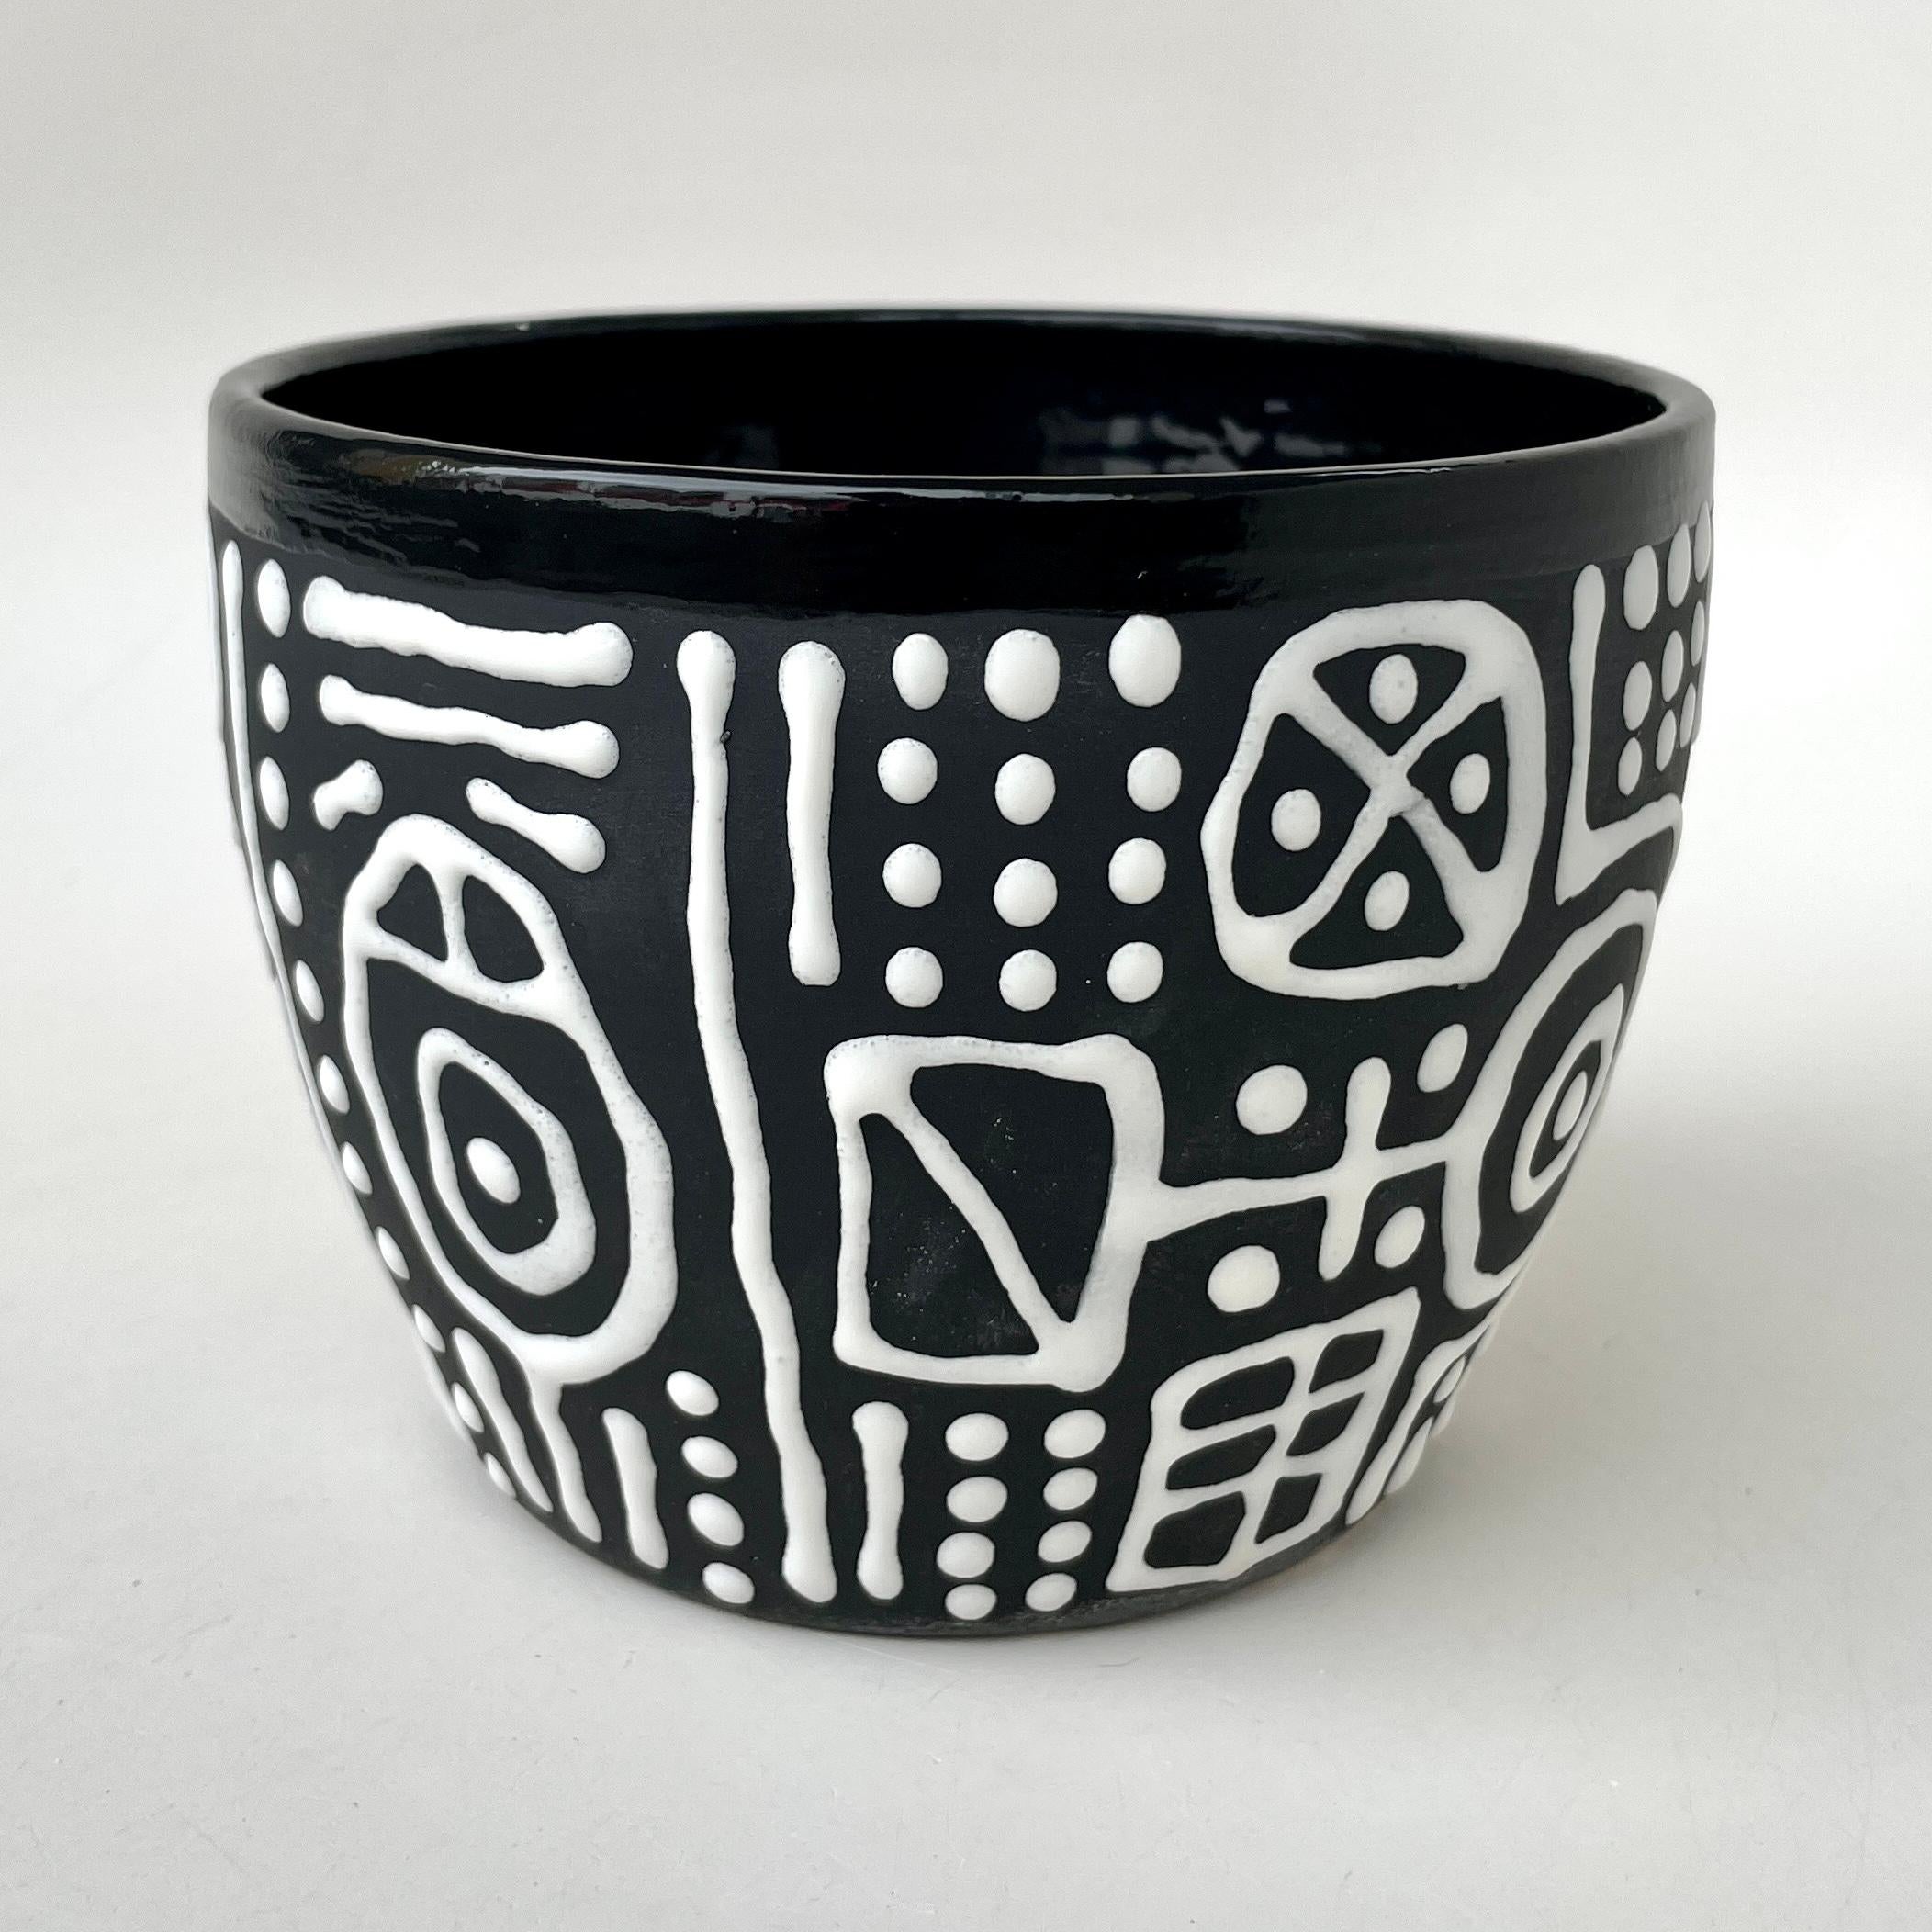 Ceramic La Mola Tumbler, Handmade and Food Safe, by Artist Stef Duffy For Sale